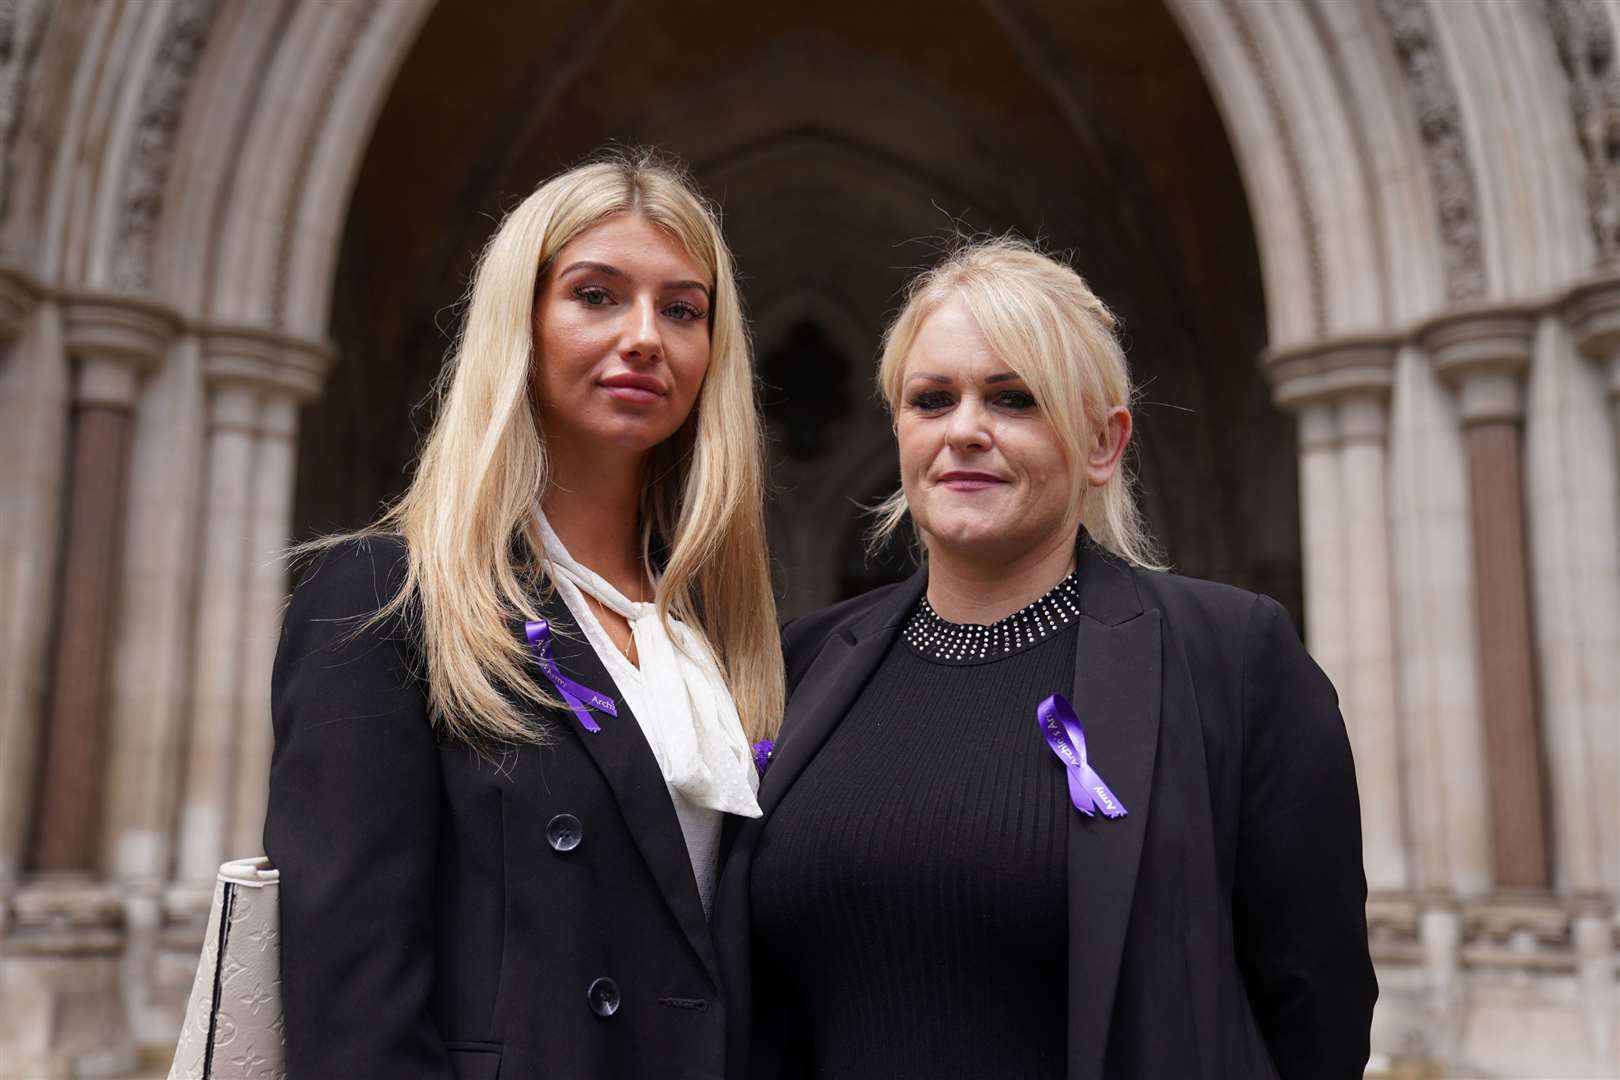 Archie Battersbee’s mother Hollie Dance (right) and family friend Ella Carter, outside the High Court in London (Kirsty O’Connor/PA)